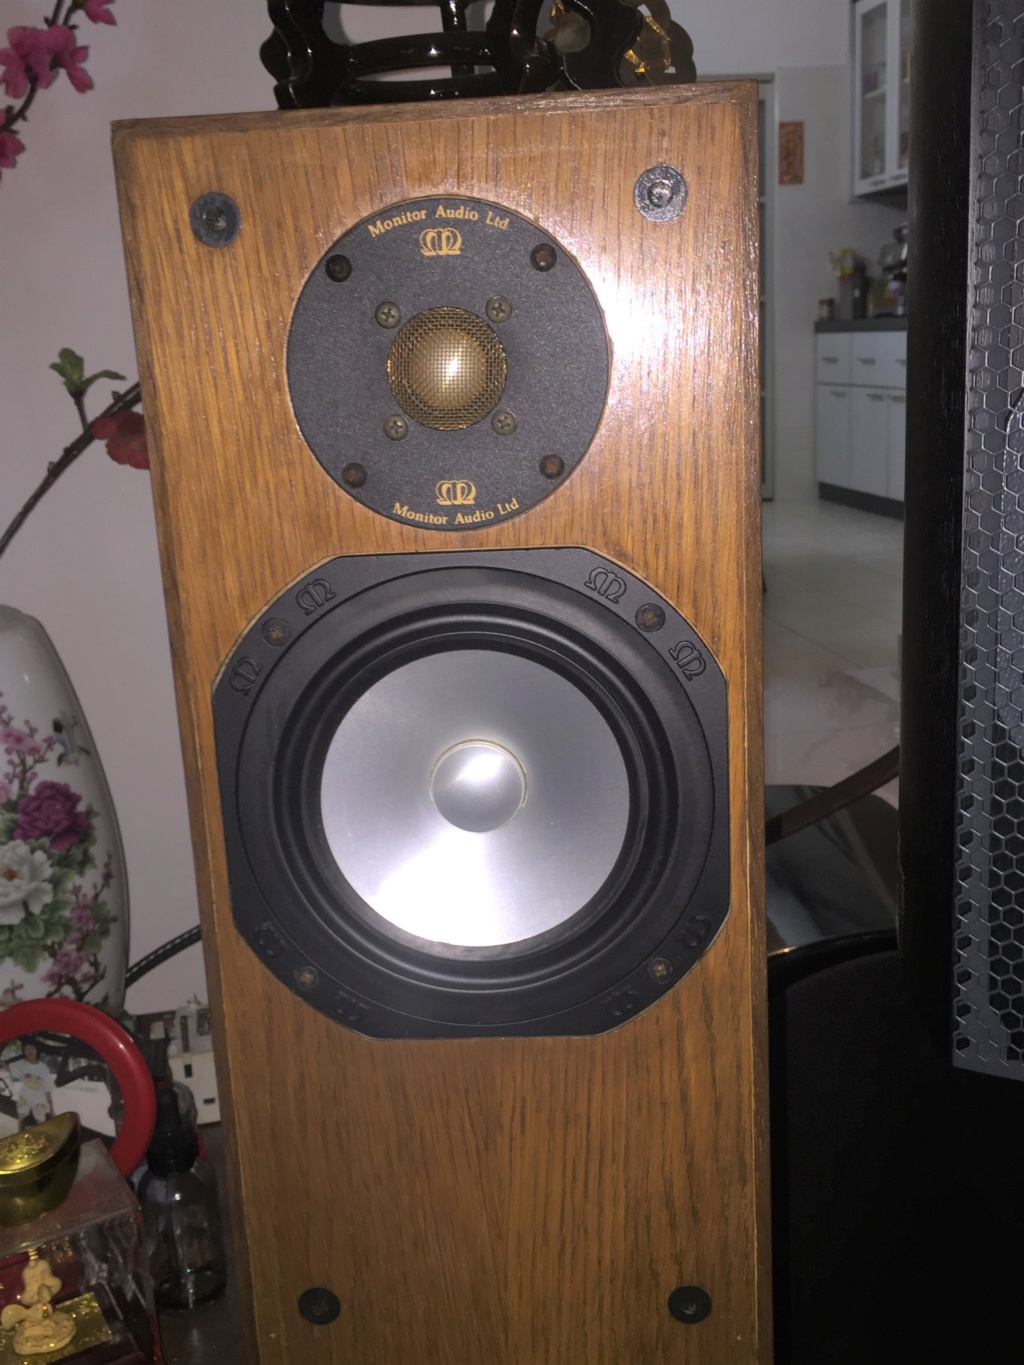 Monitor Audio studio 20 speakers-Made In England (sold)